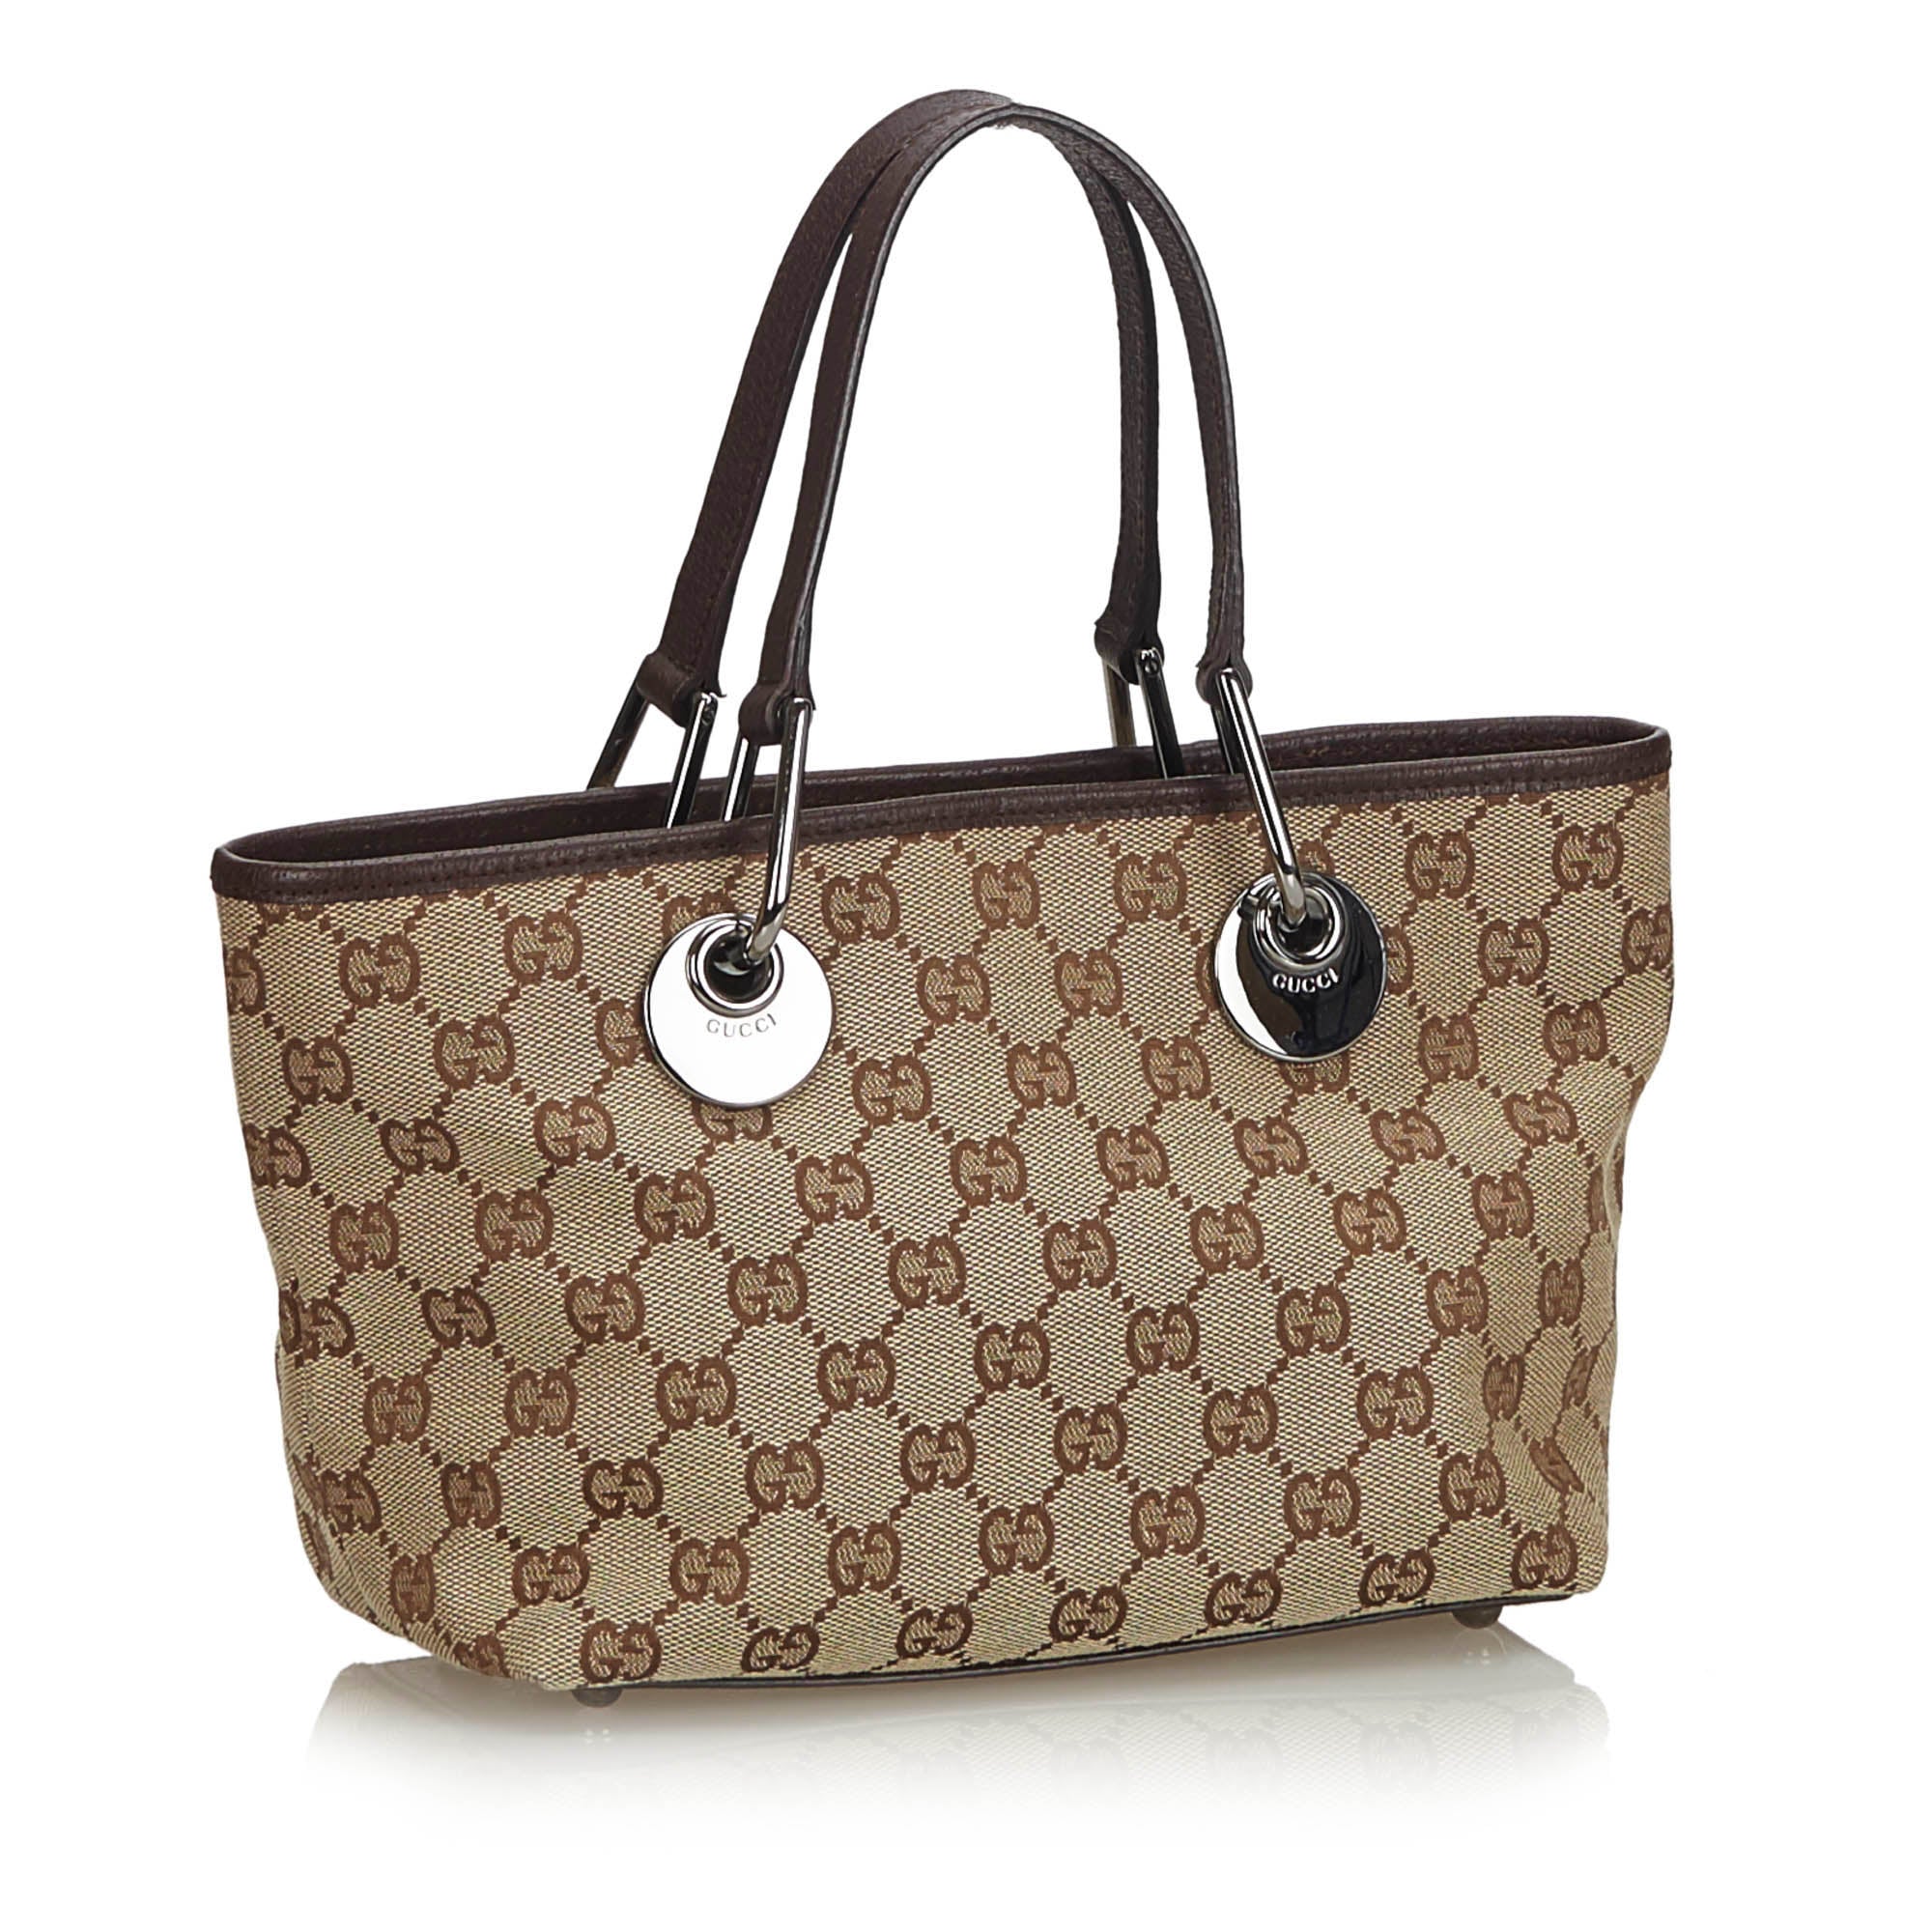 Buy & Consign Authentic Gucci GG Canvas Eclipse Tote Bag at The Plush Posh